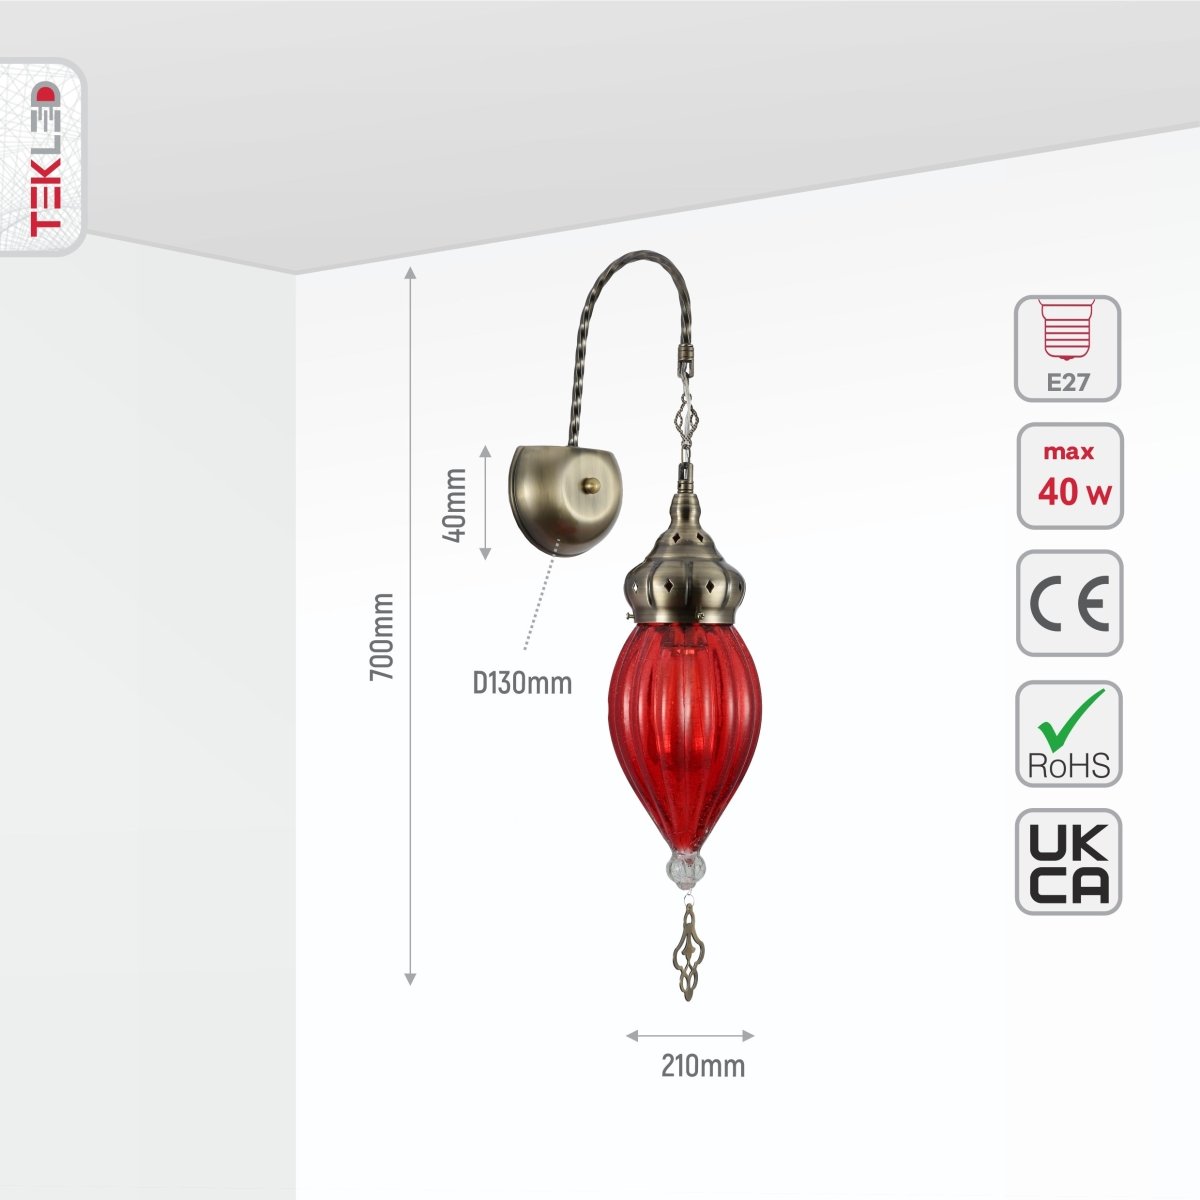 Size and specs of Moroccan Style Antique Brass and Red Glass Oriental Wall Light E27 | TEKLED 151-19458